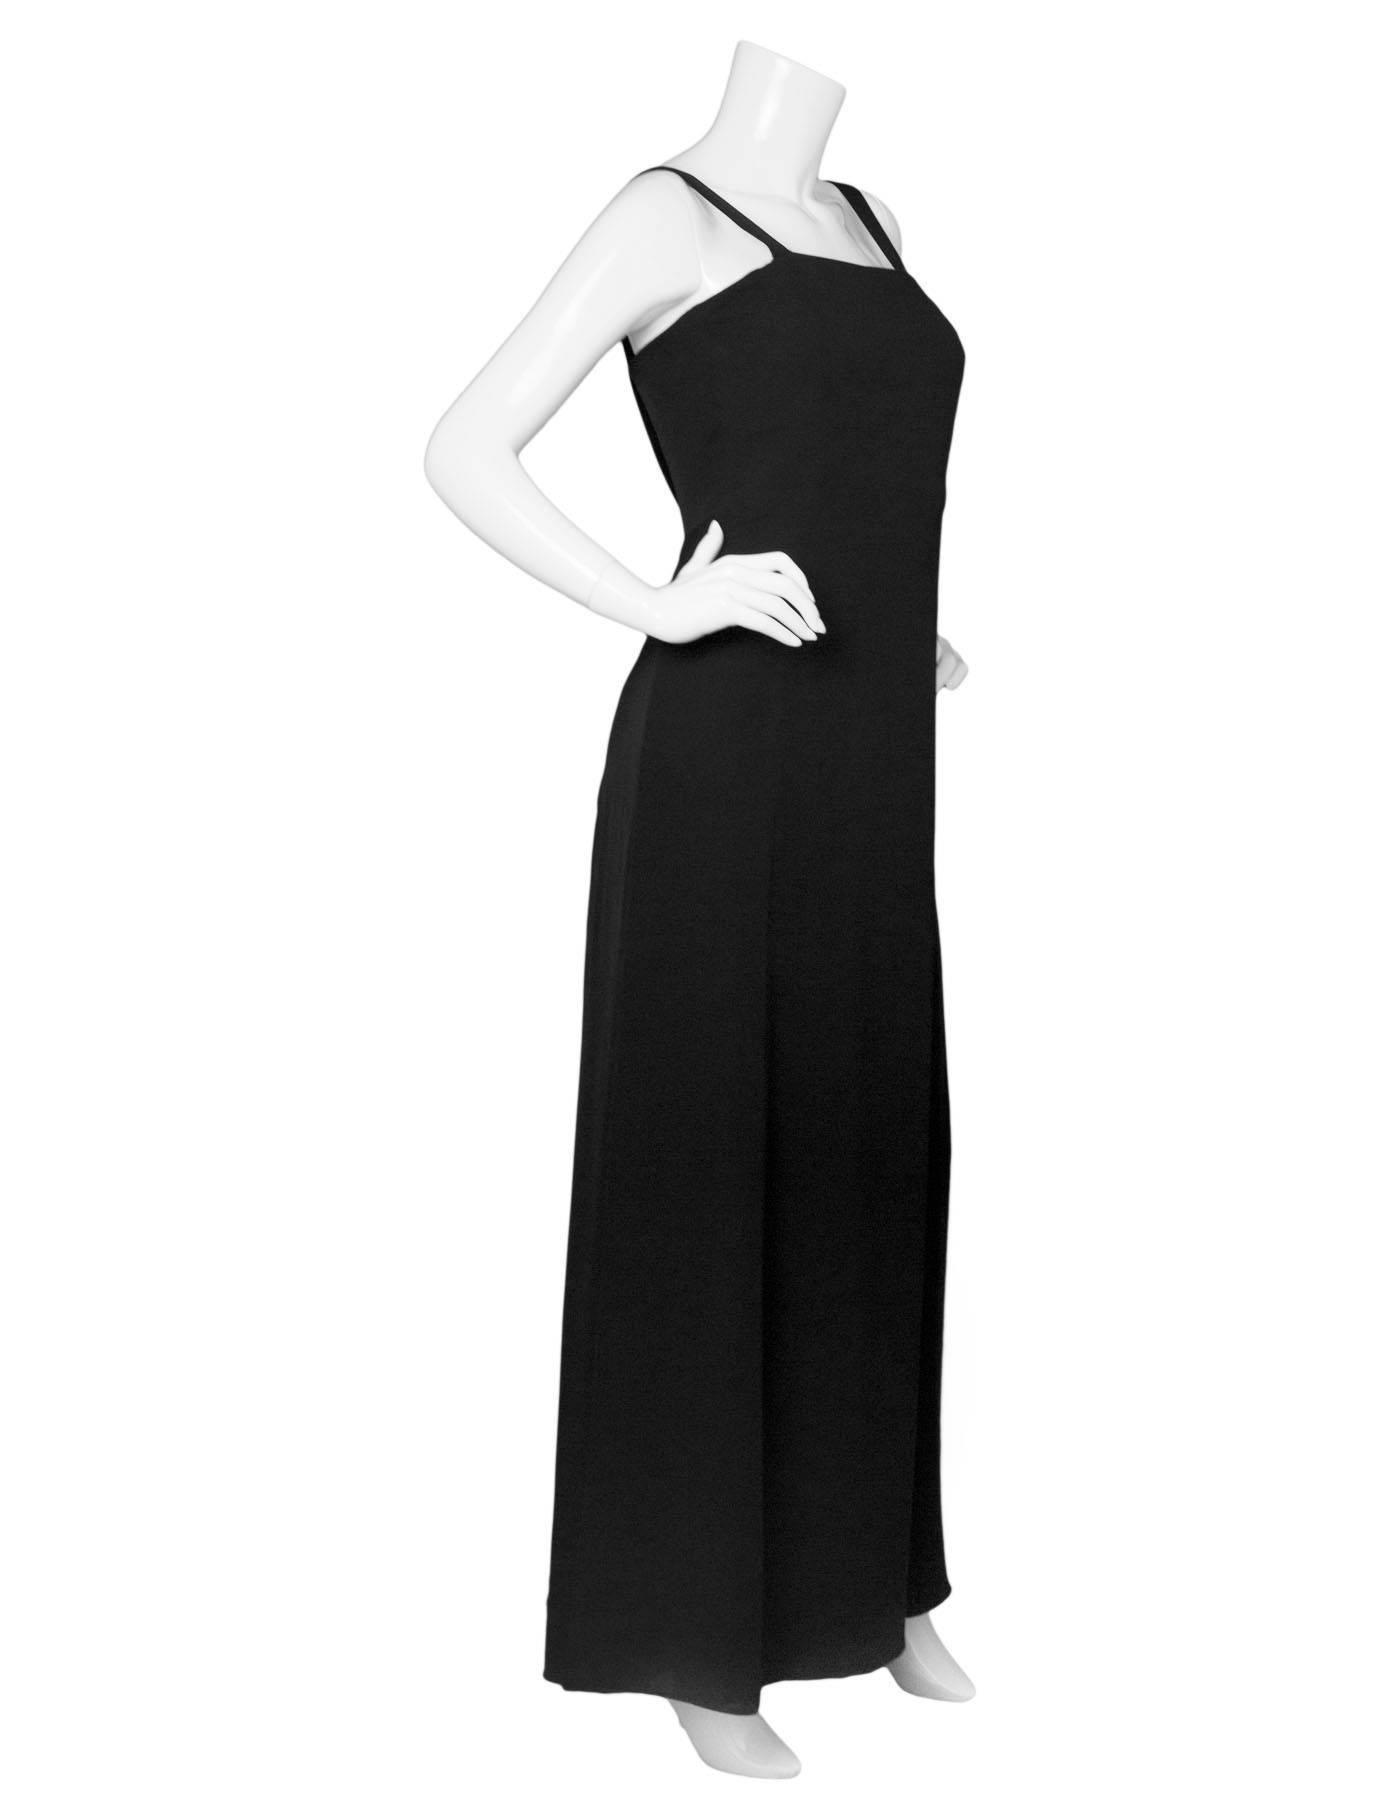 Armani Collezioni Black Gown Sz 8
Features draping at back

Made In: Italy
Color: Black
Composition: 54% Silk, 46% Rayon
Lining: Black silk
Closure/Opening: Hidden side zip closure
Overall Condition: Excellent pre-owned condition with the exception